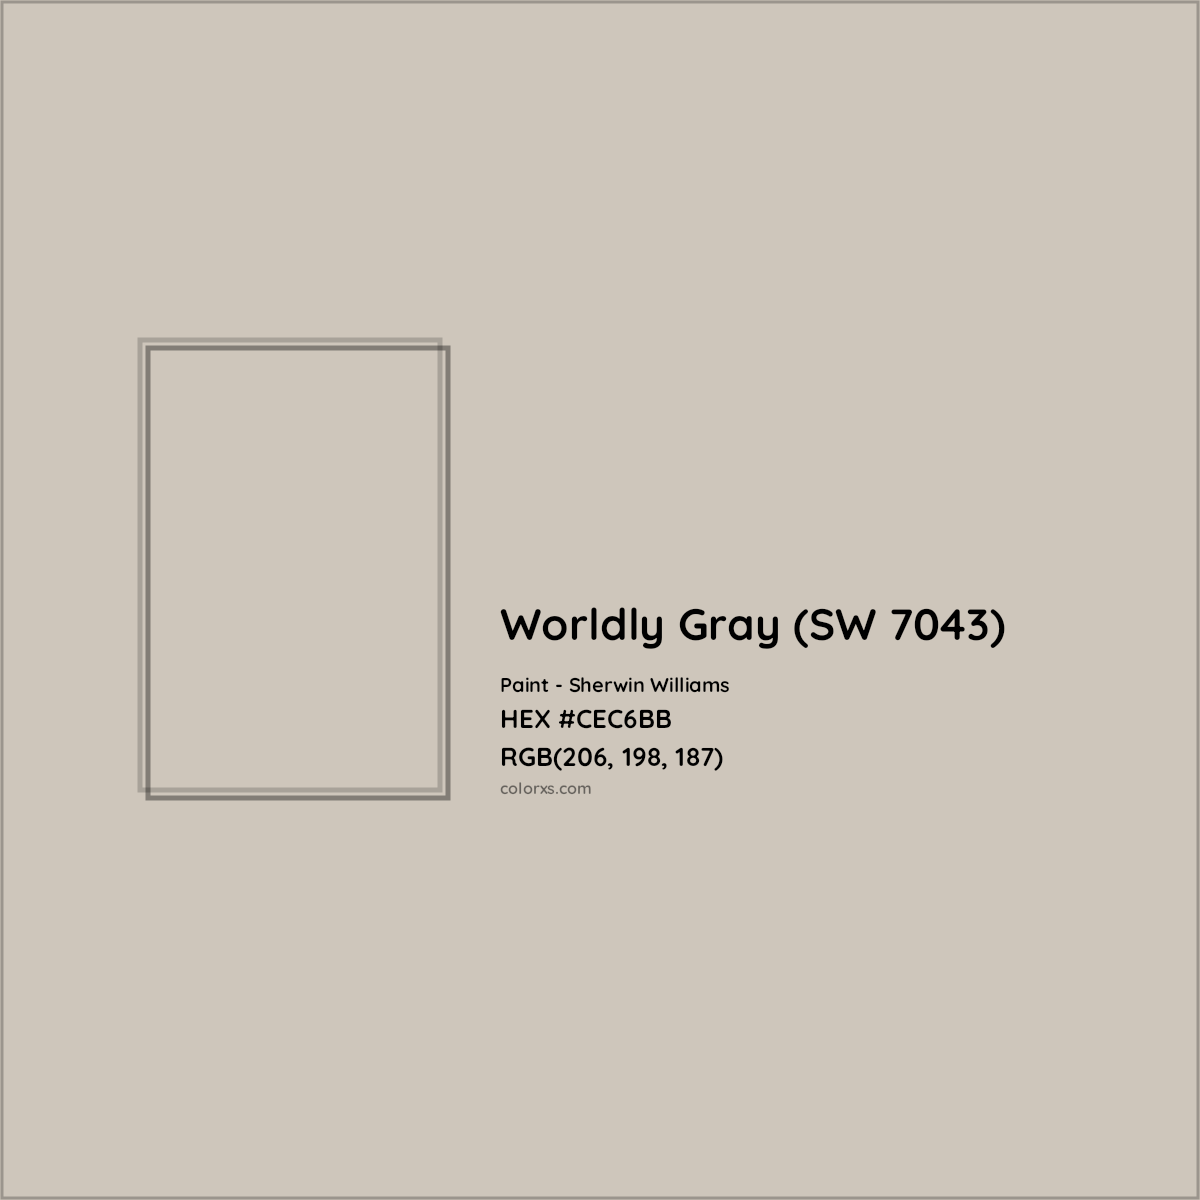 HEX #CEC6BB Worldly Gray (SW 7043) Paint Sherwin Williams - Color Code